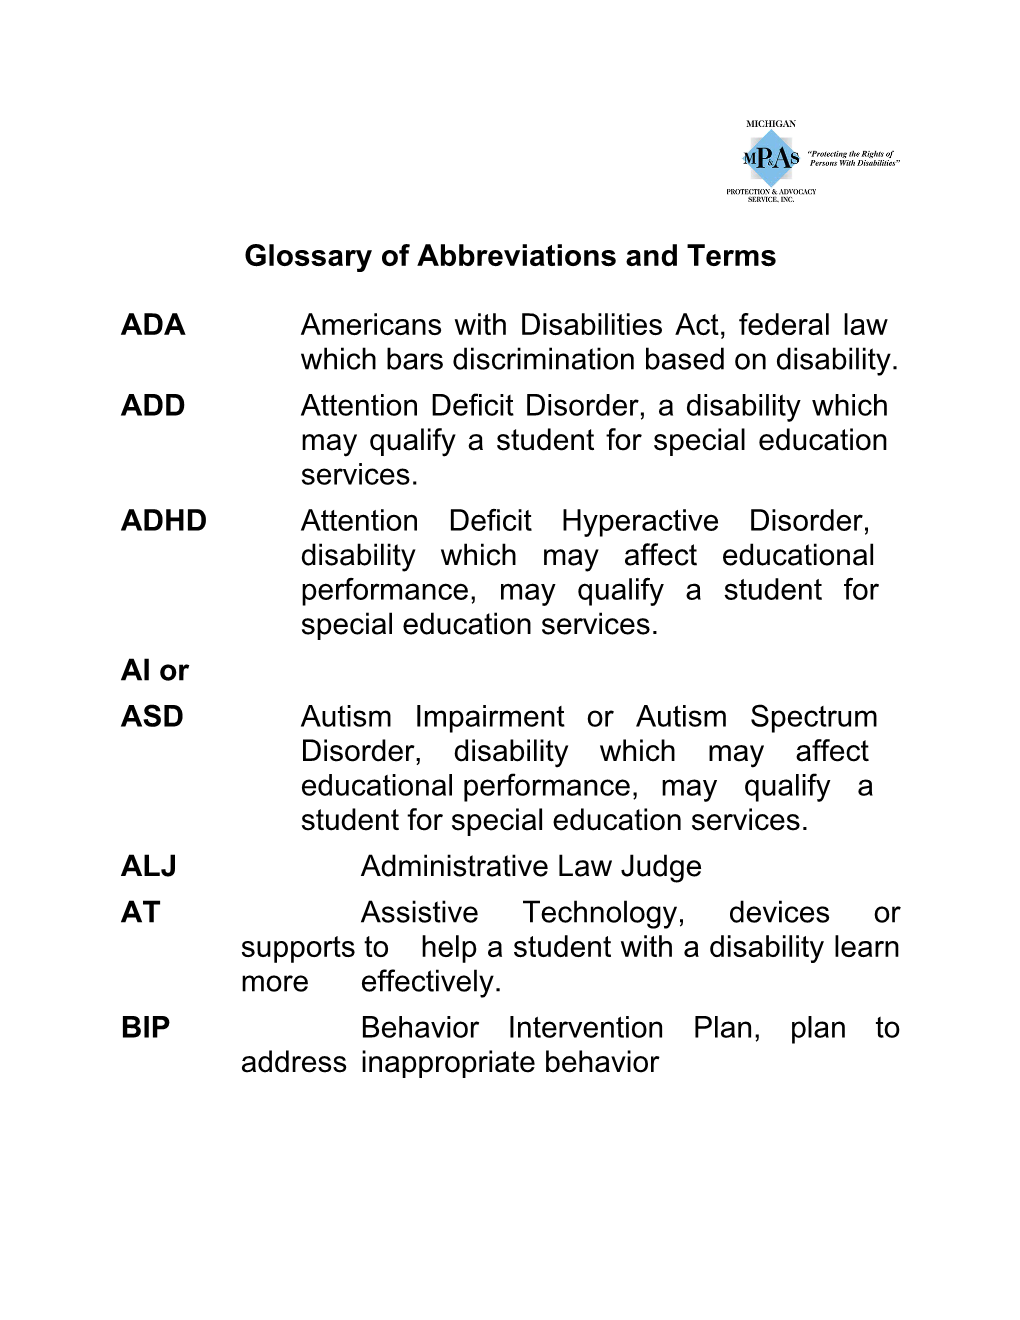 Glossary of Abbreviations and Terms